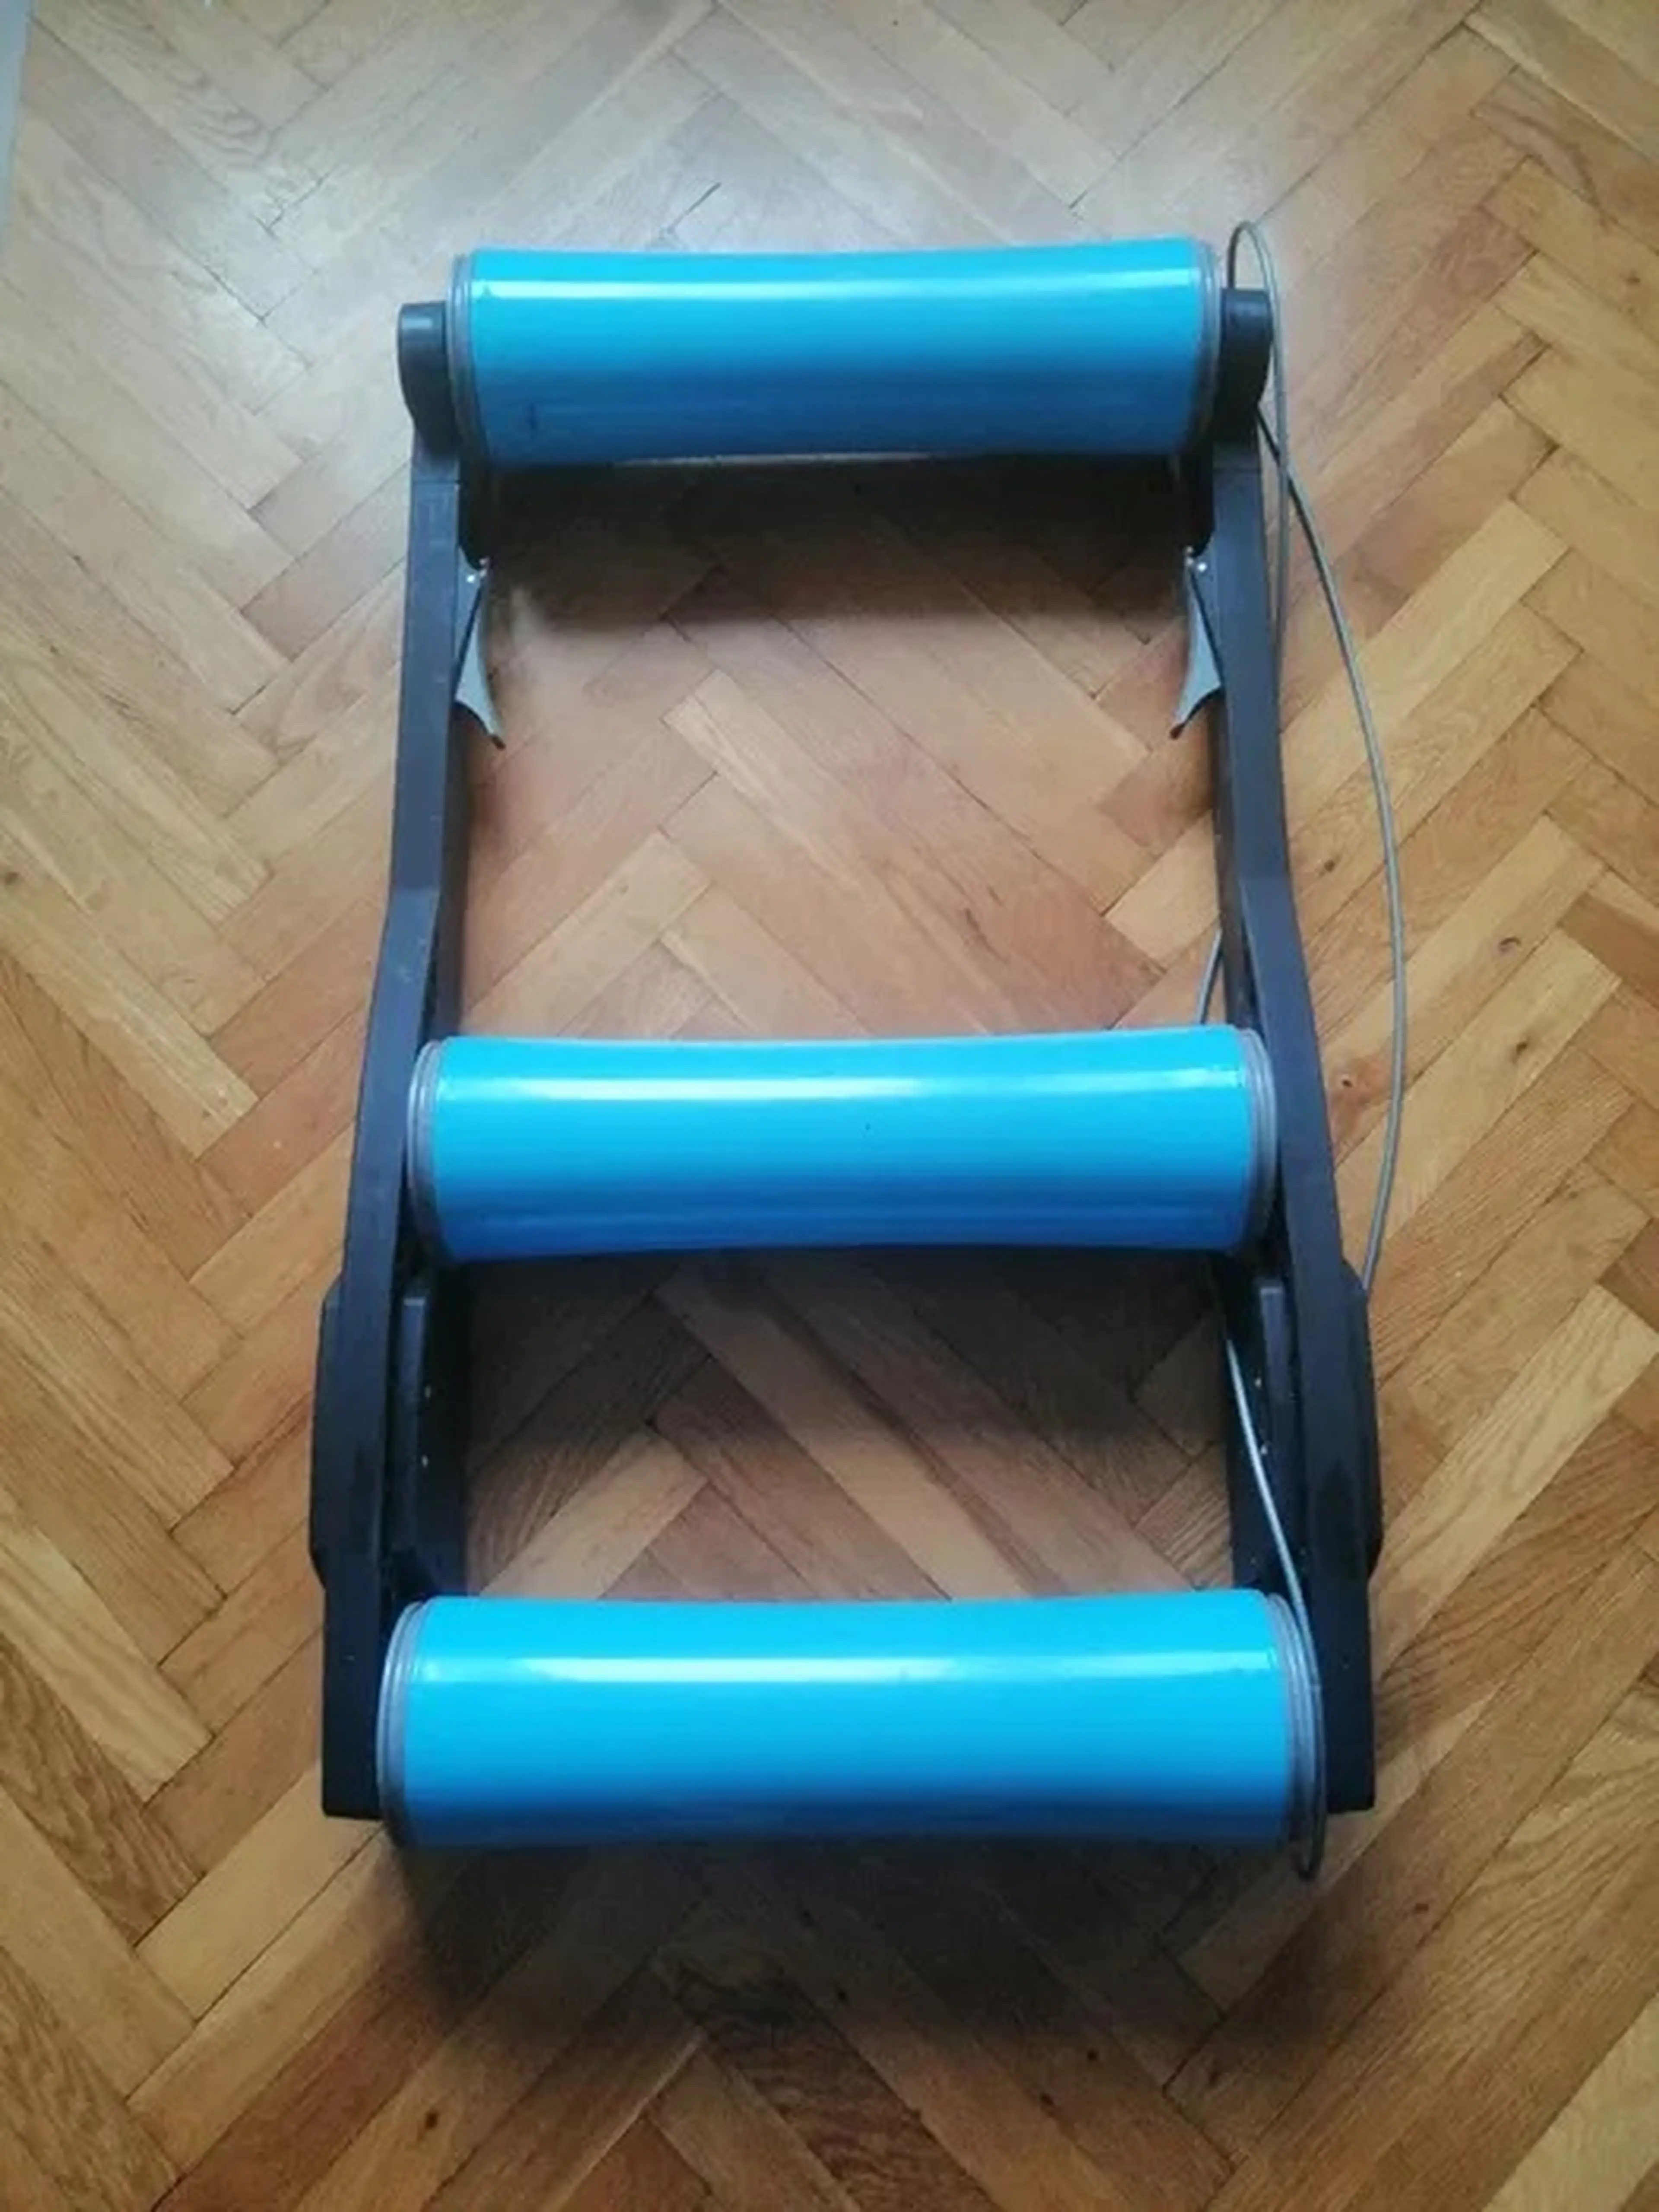 4. Roller Tacx Galaxia